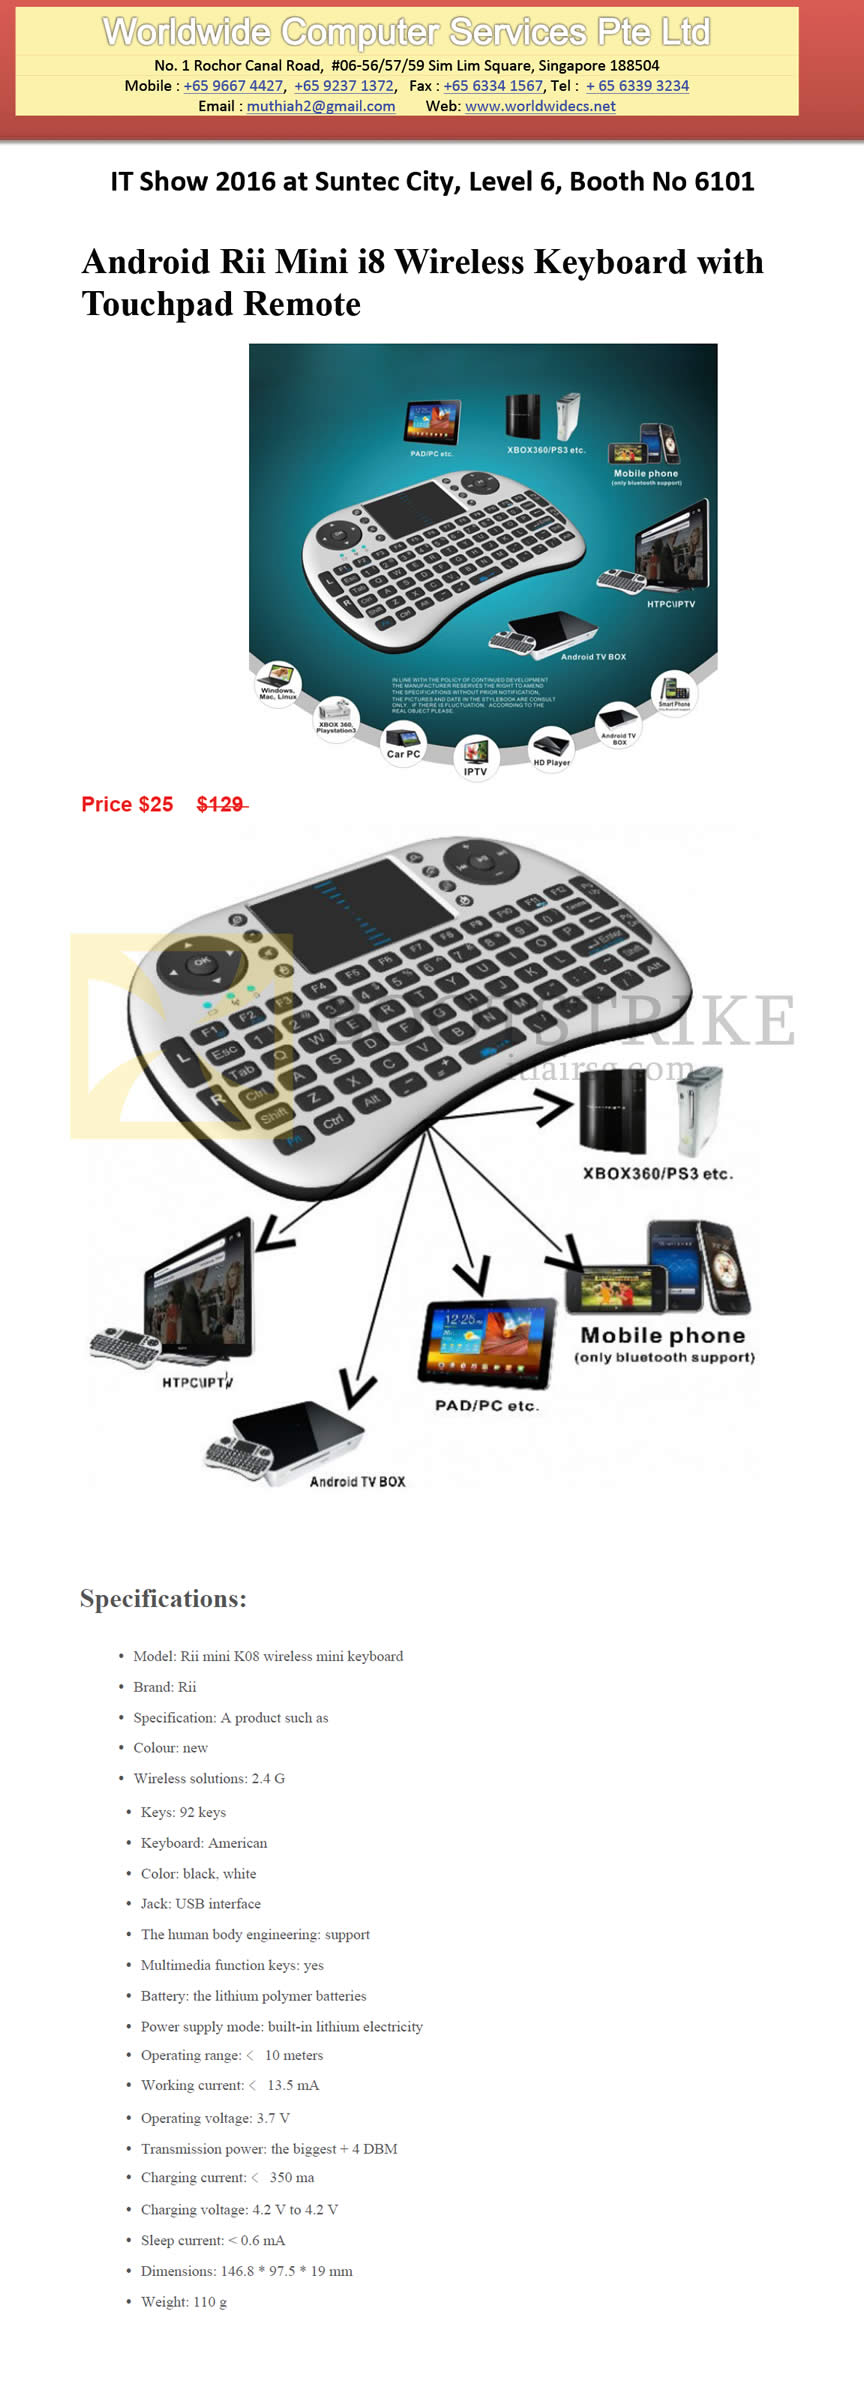 IT SHOW 2016 price list image brochure of Worldwide Computer Services Android Rii Mini I8 Wireless Mini Keyboard